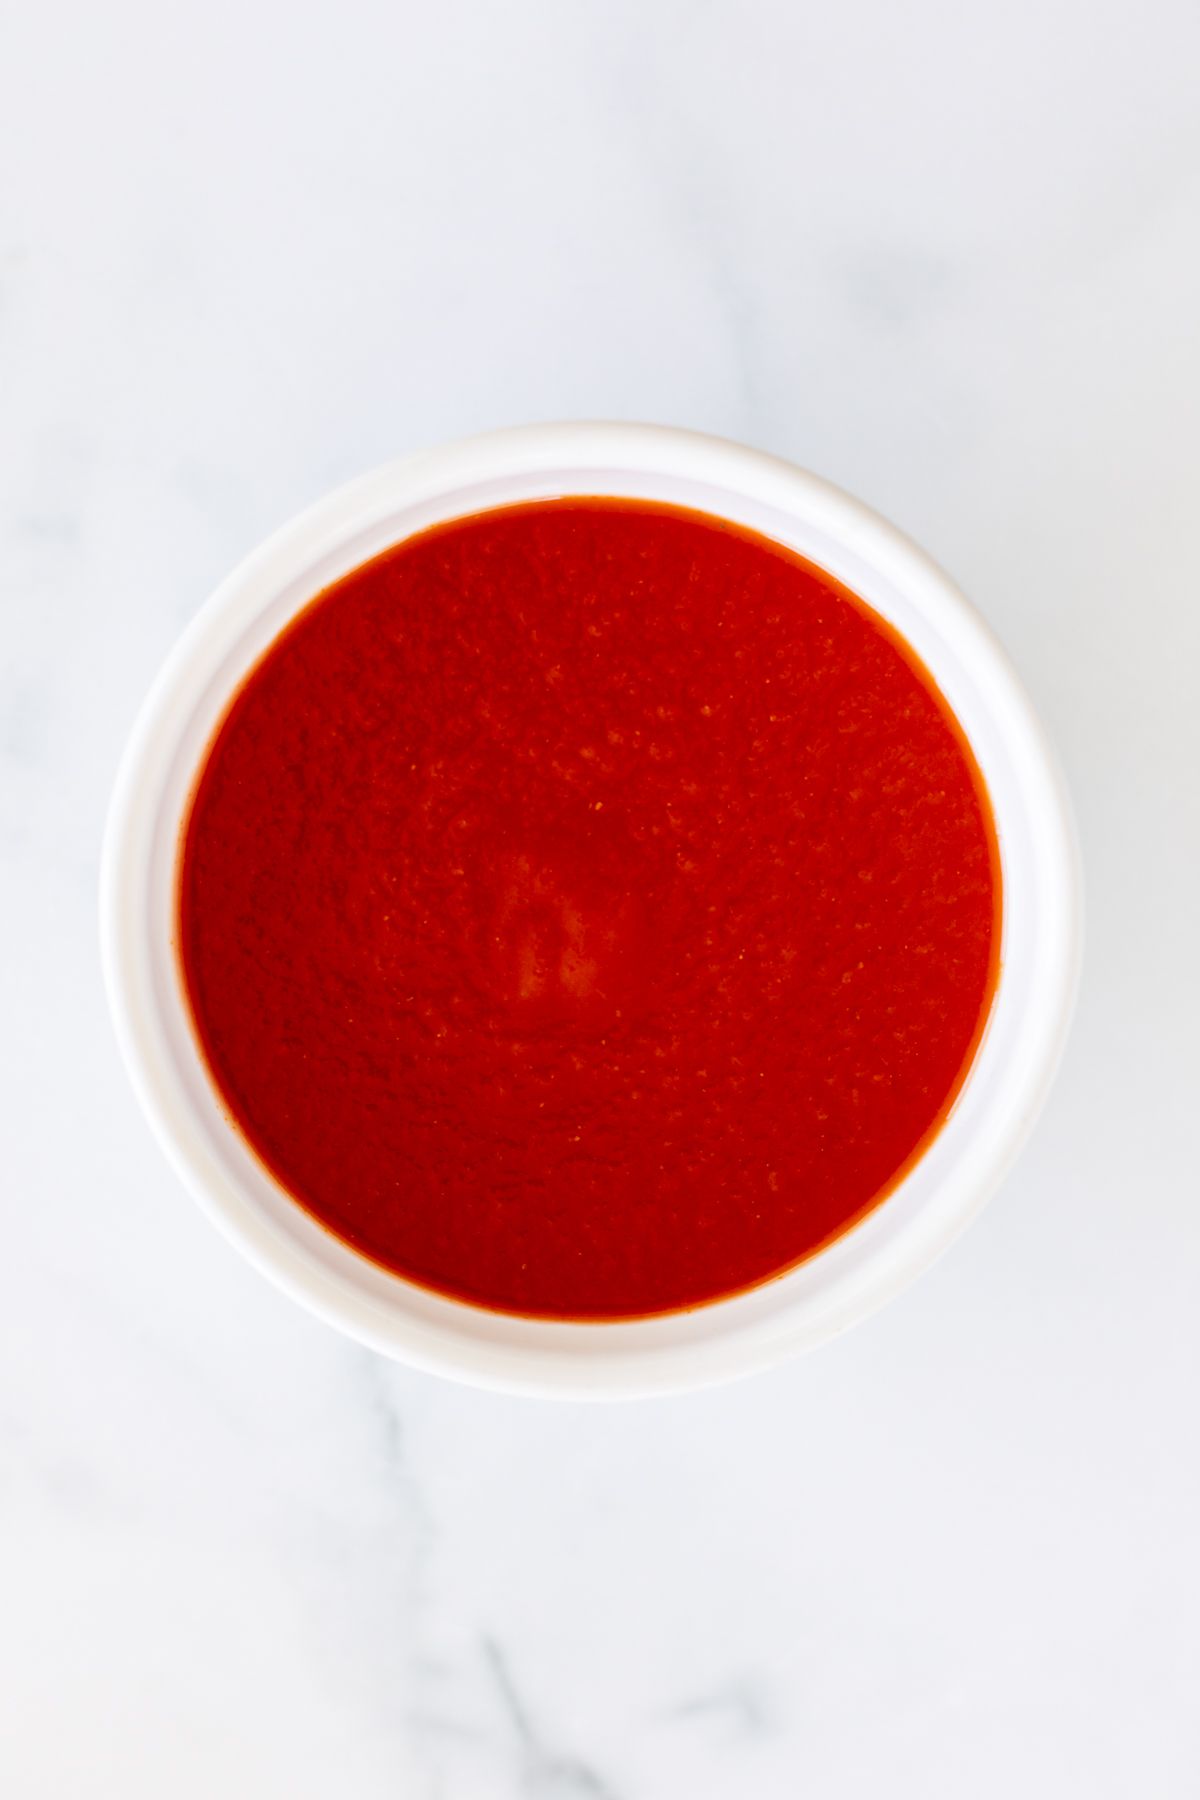 A small white bowl full of tomato sauce for a tomato paste substitute.